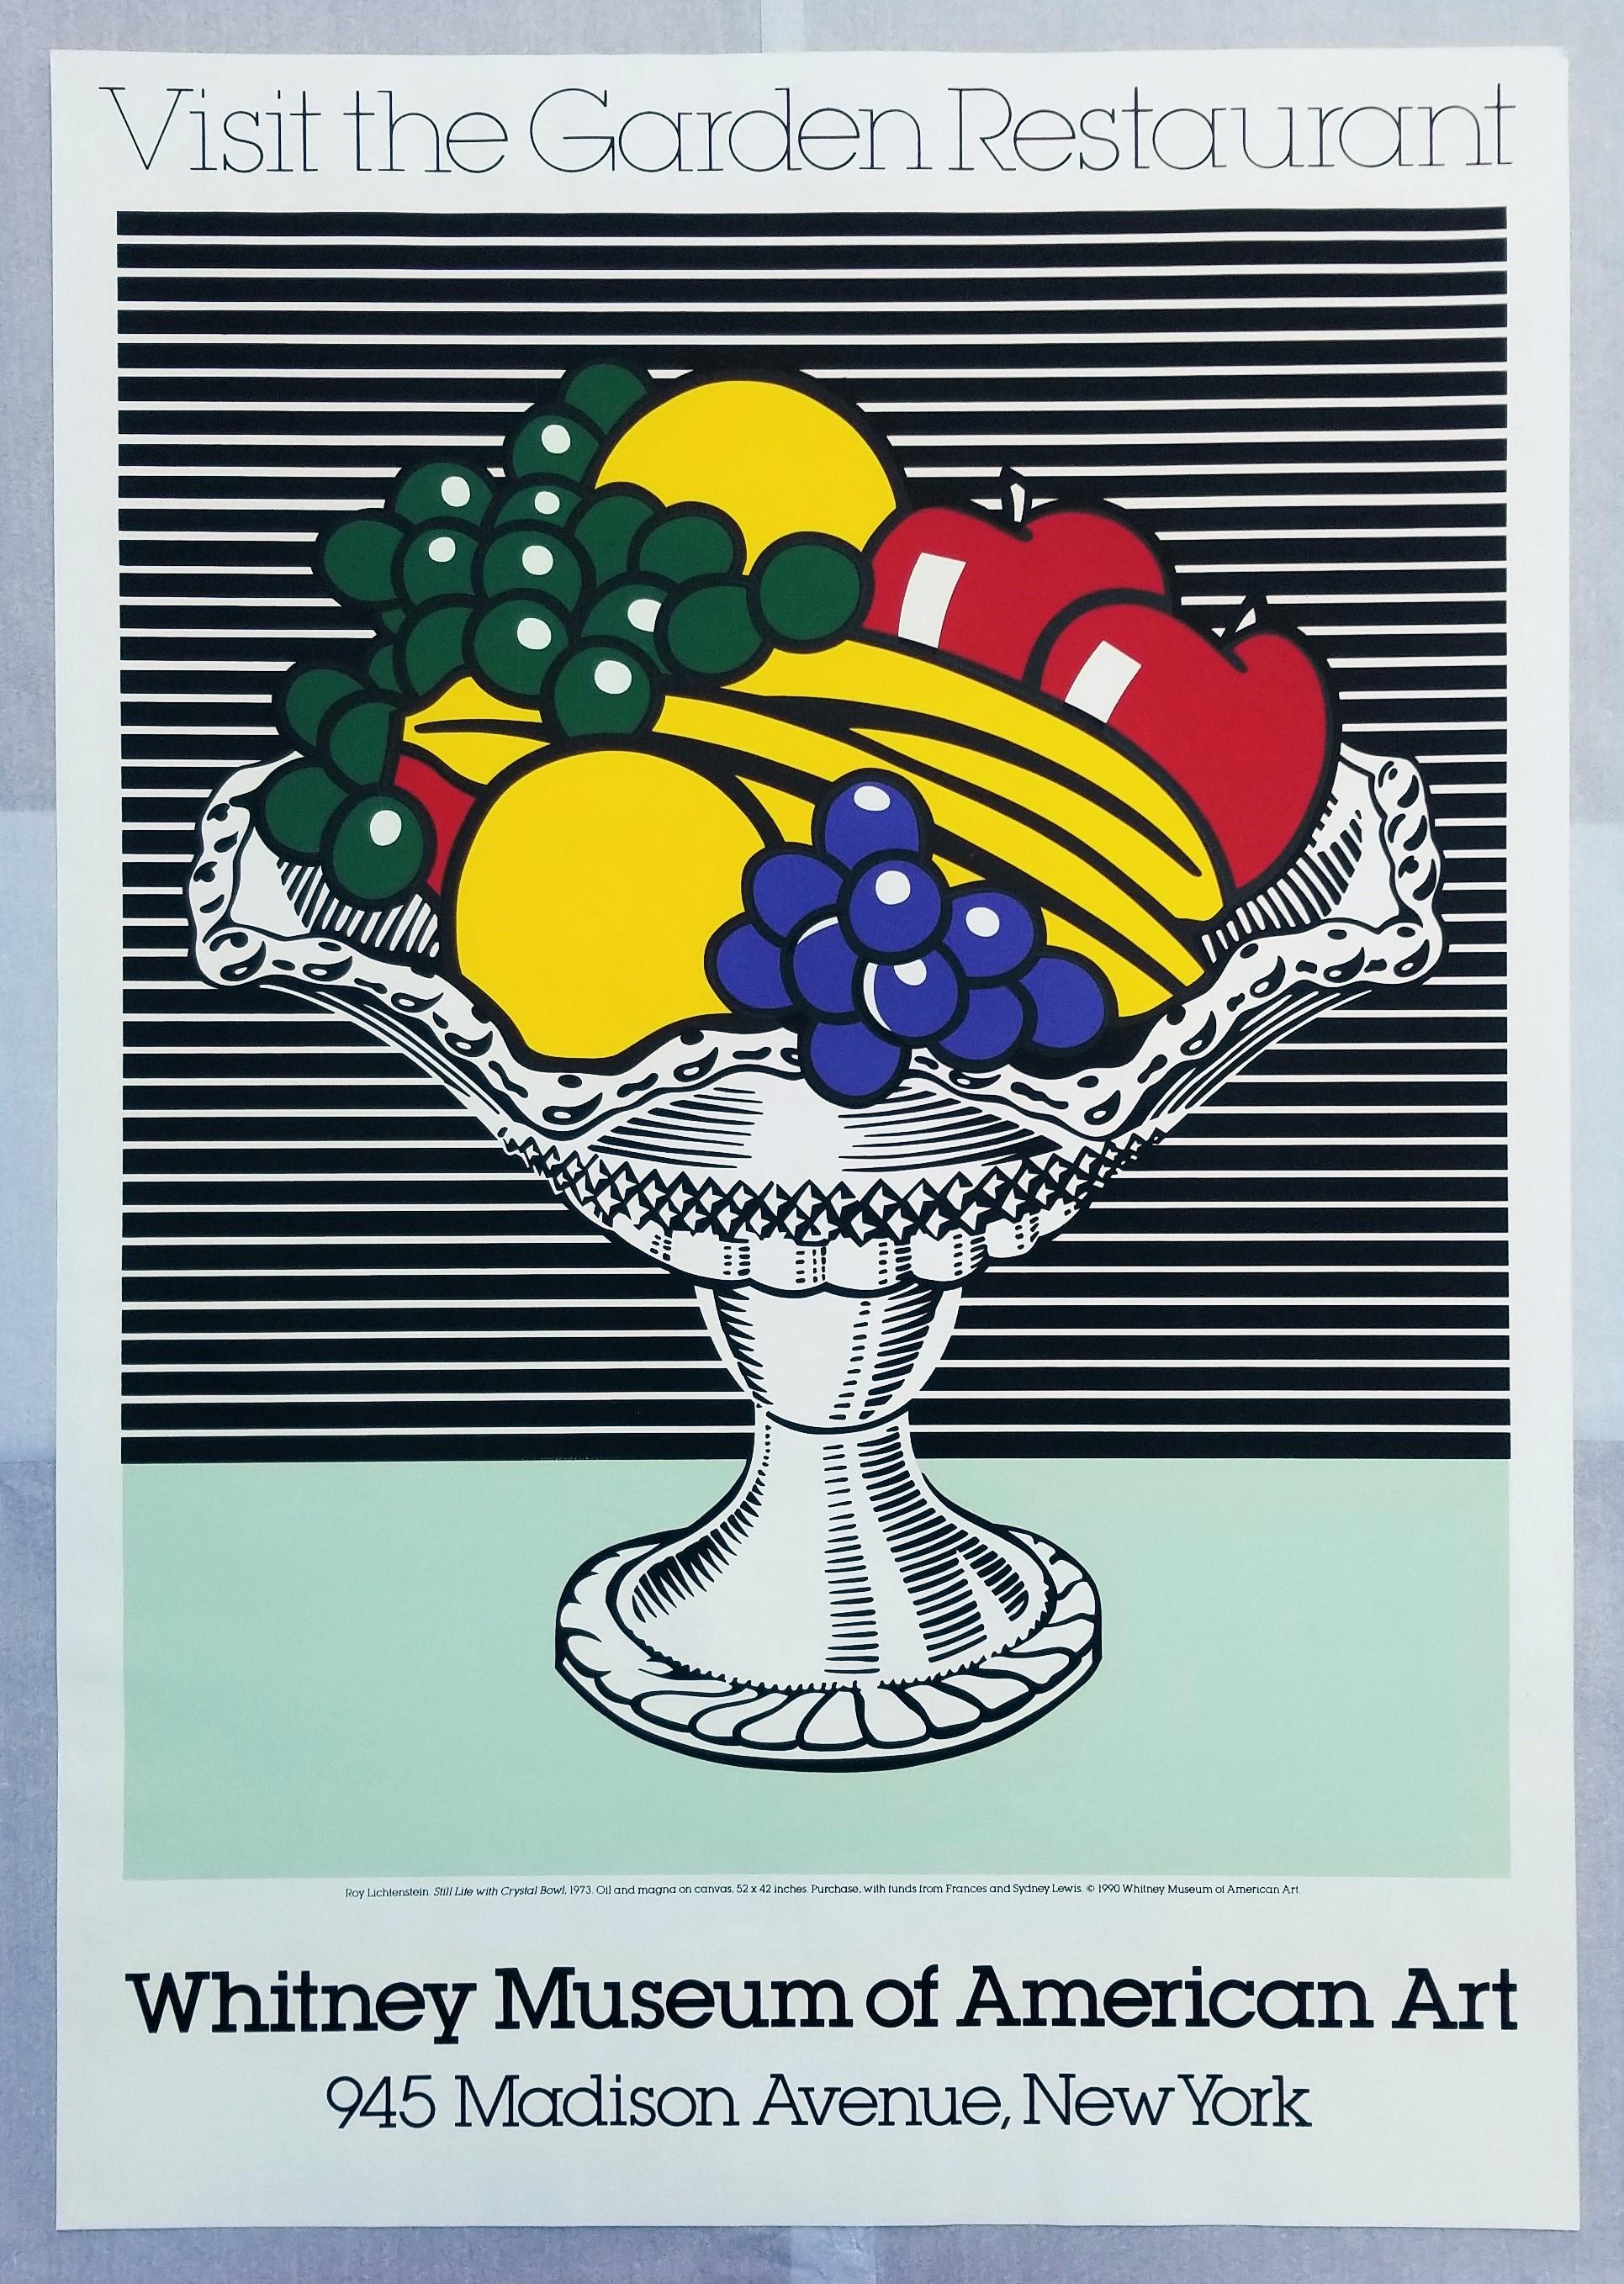 Whitney Museum of American Art (Still Life with Crystal Bowl) Poster /// Pop Art - Print by Roy Lichtenstein